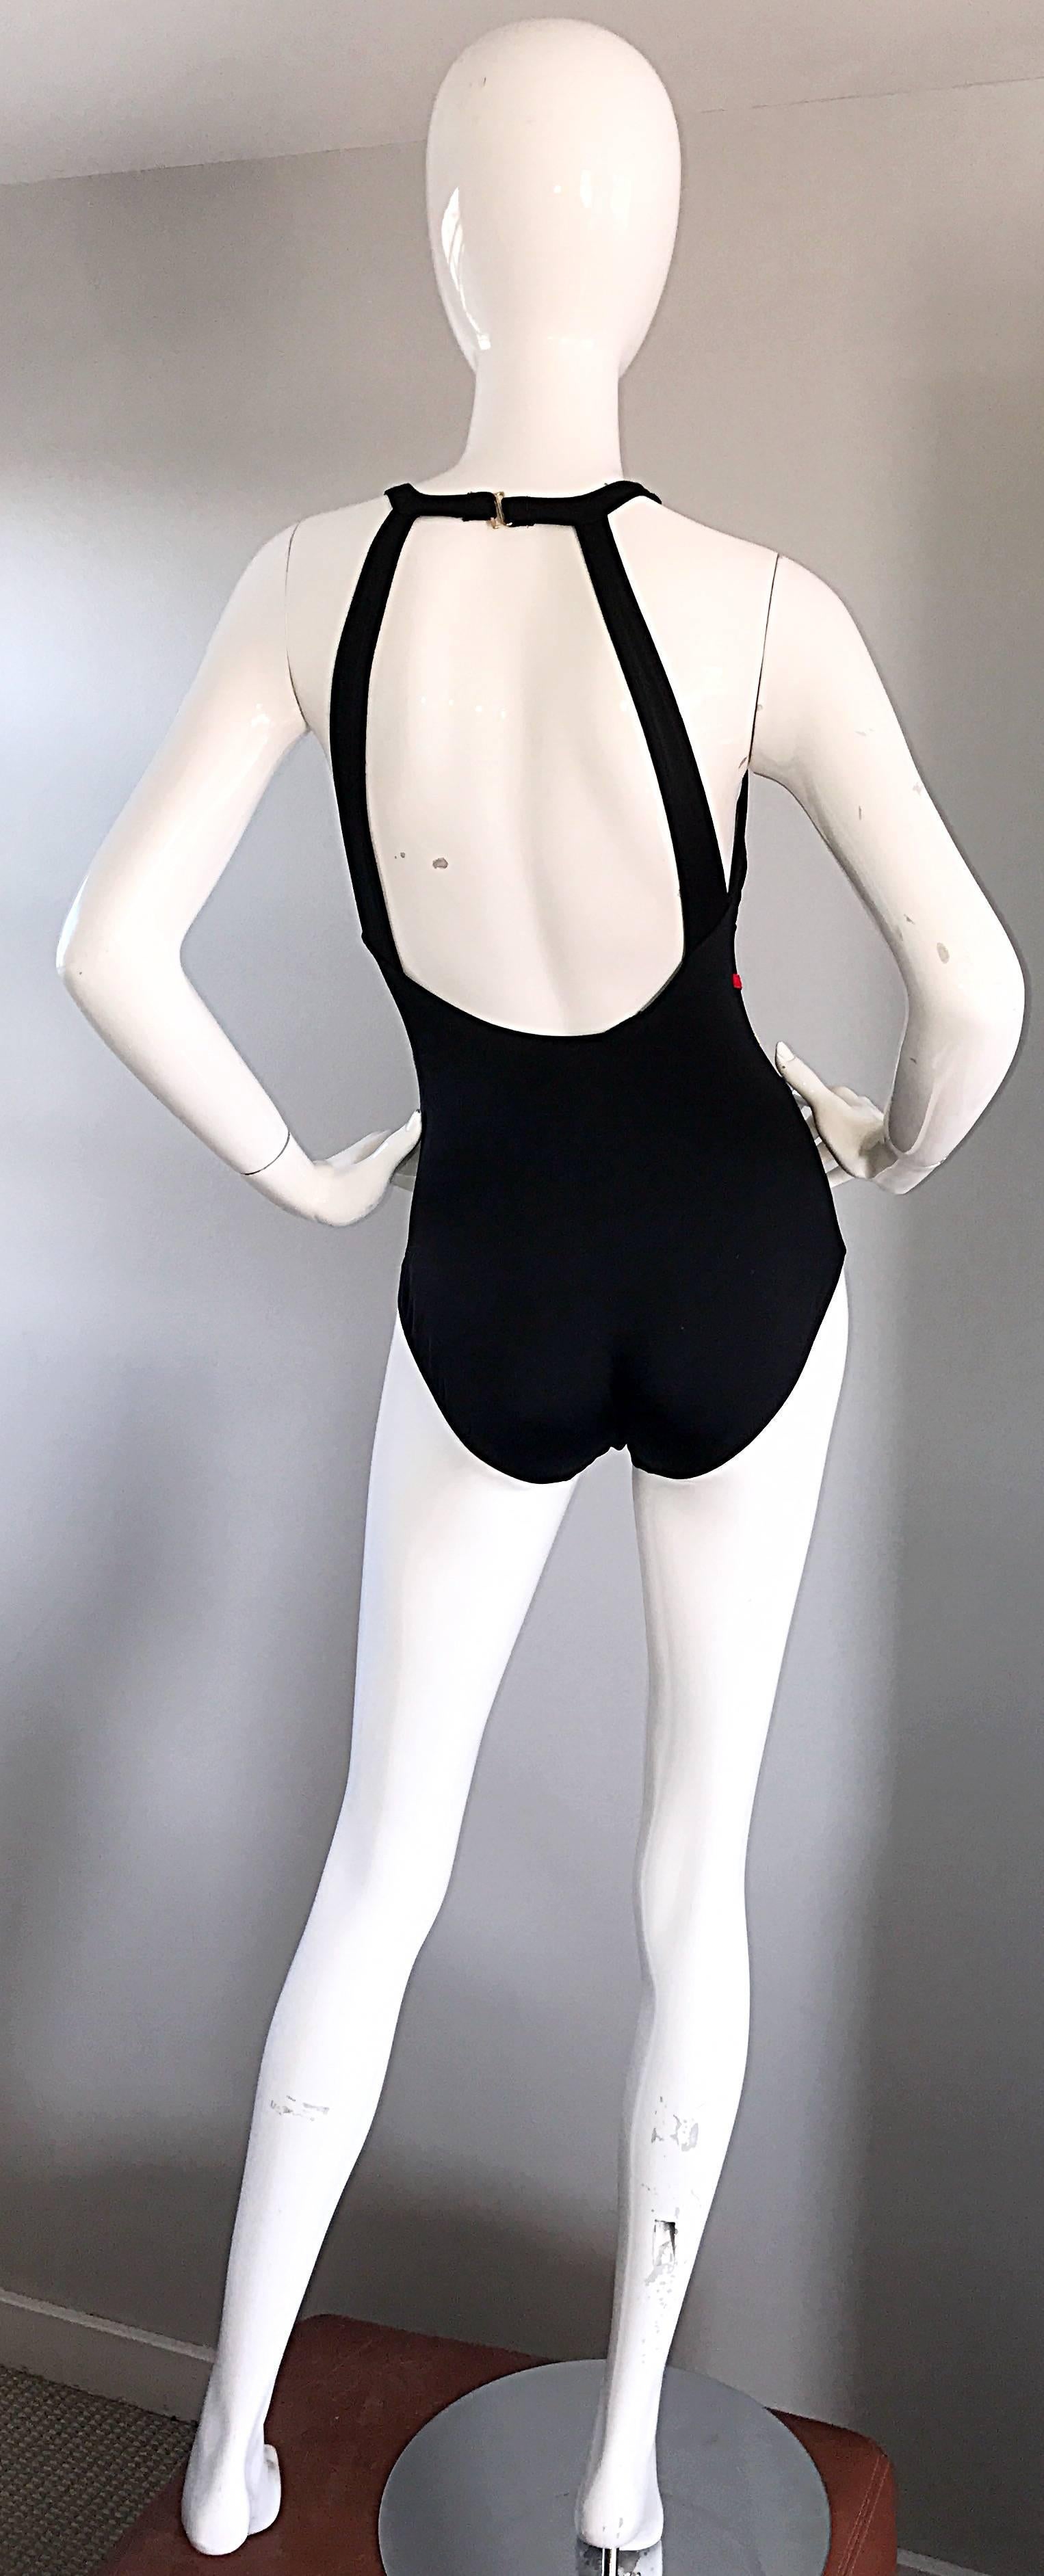 Women's Bill Blass New Vintage 1990s 90s Chic One Piece Swimsuit / Bodysuit with Bows